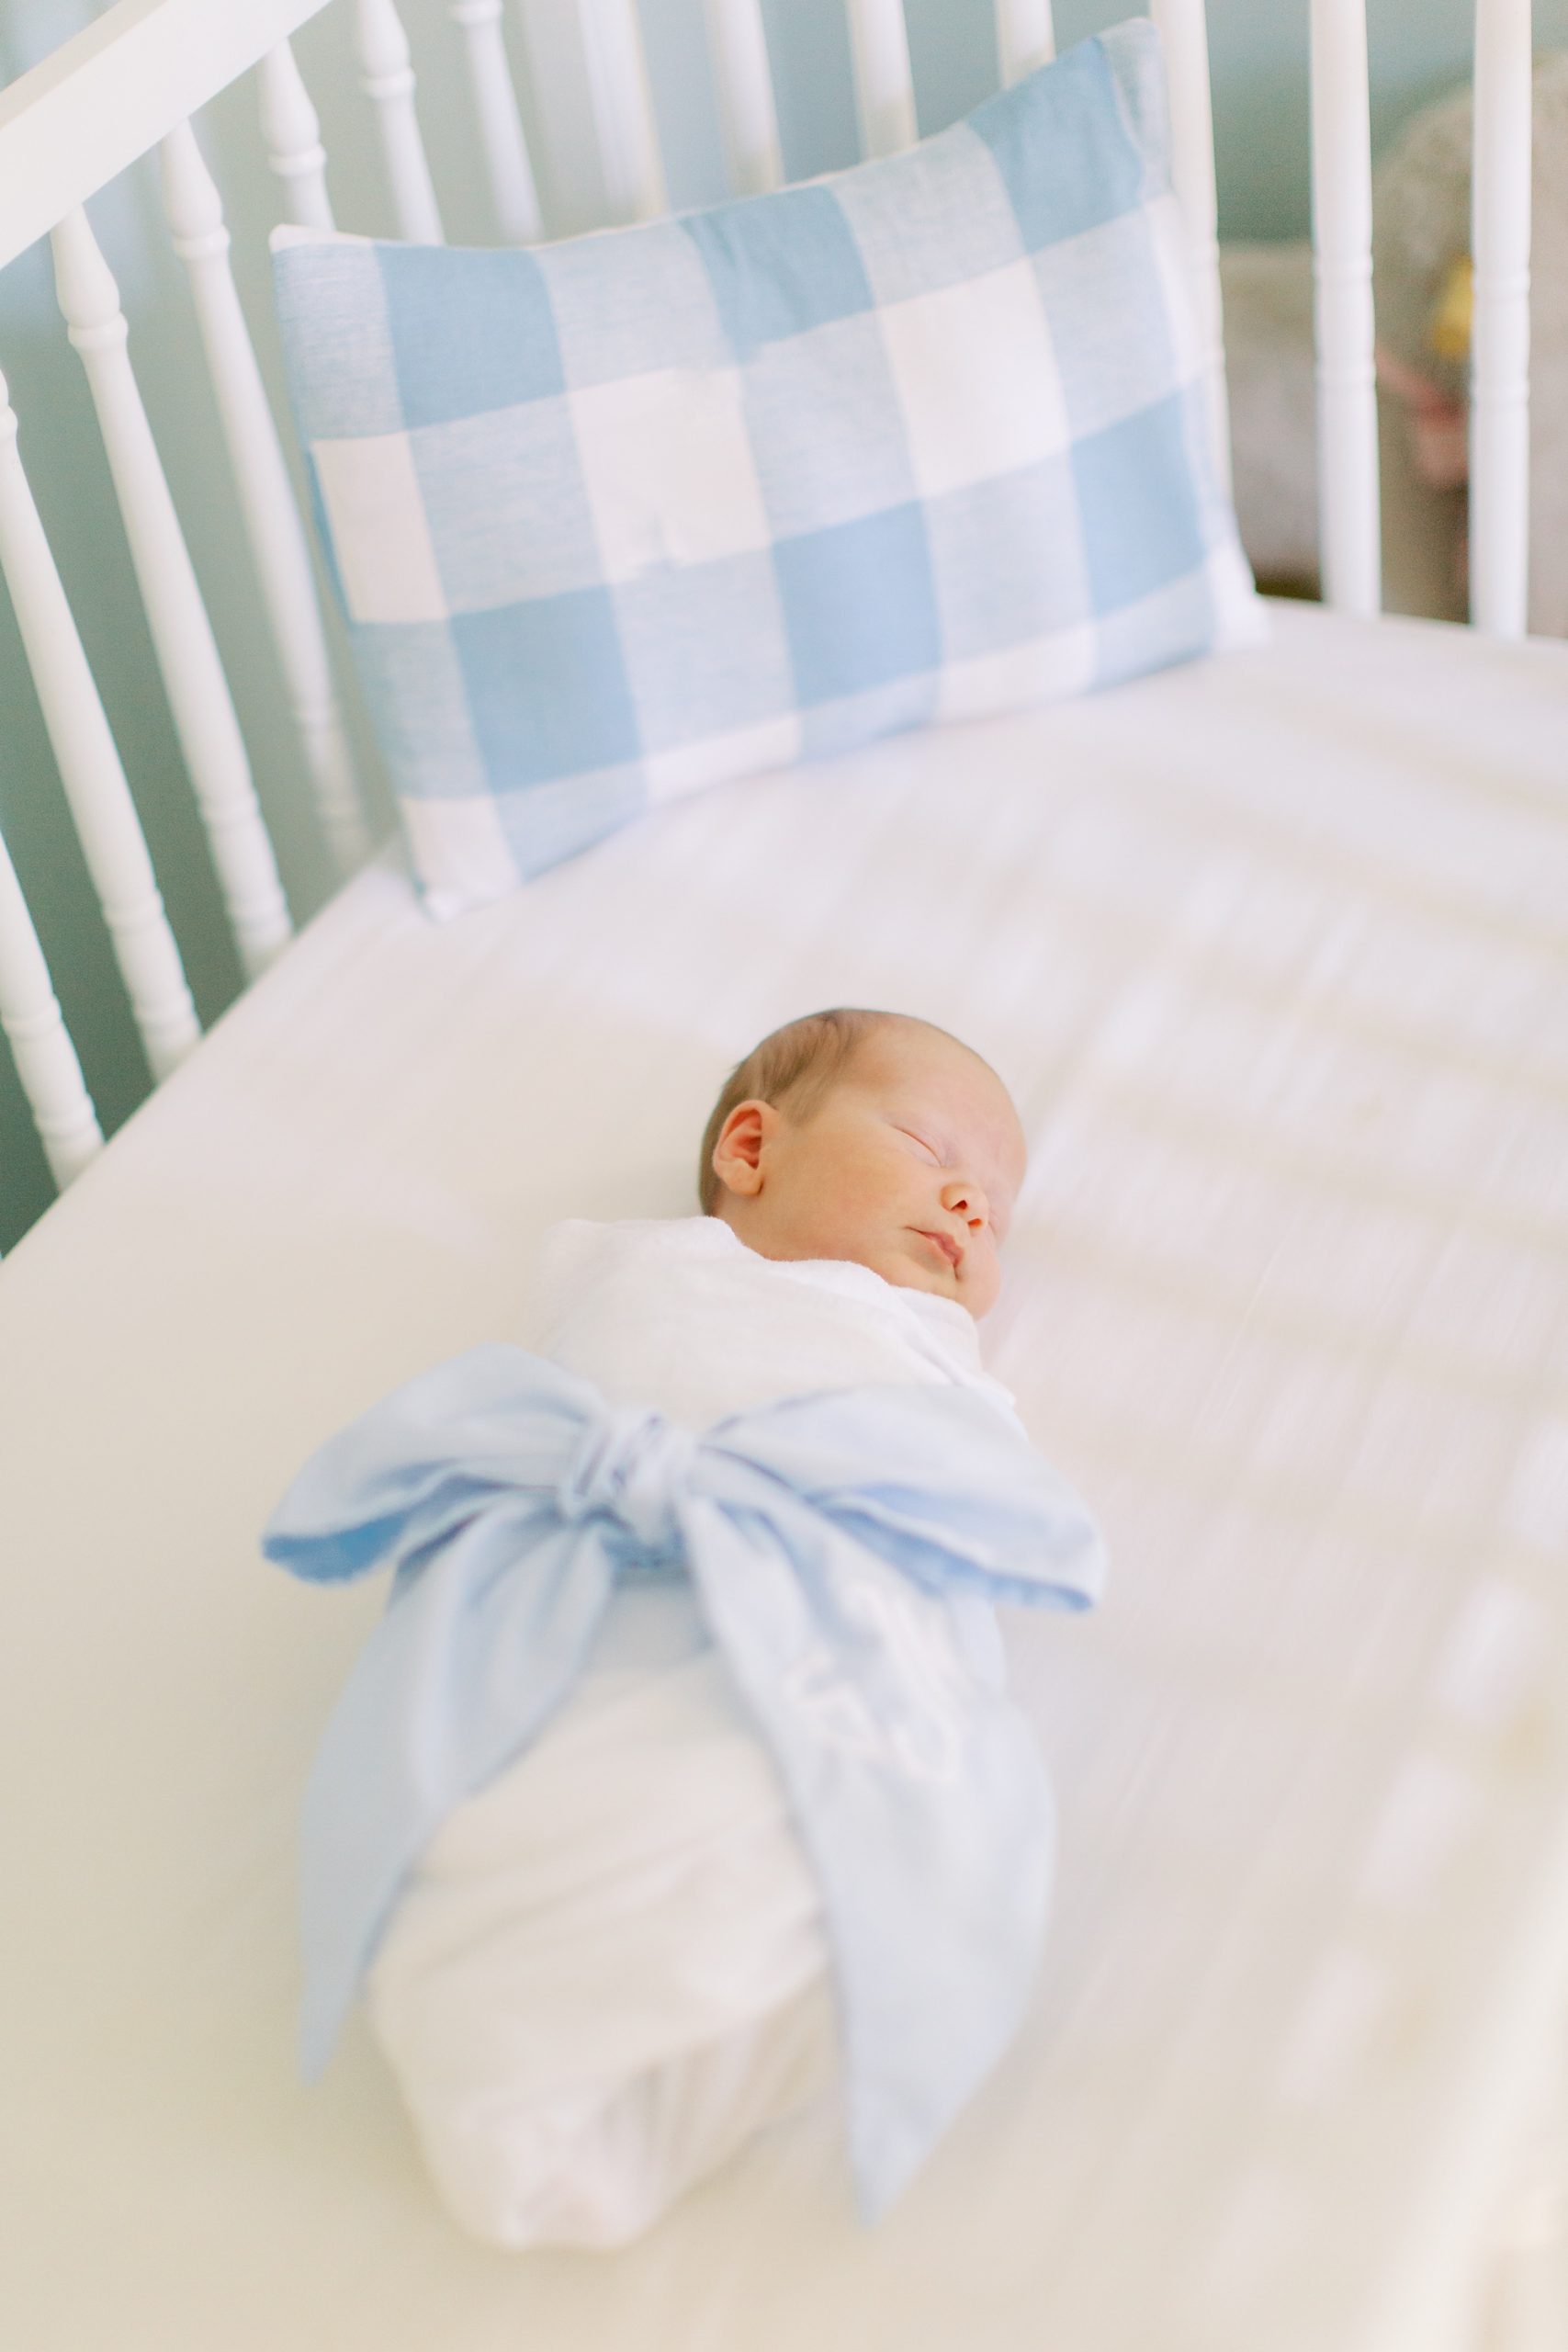 baby lays in crib with blue bow